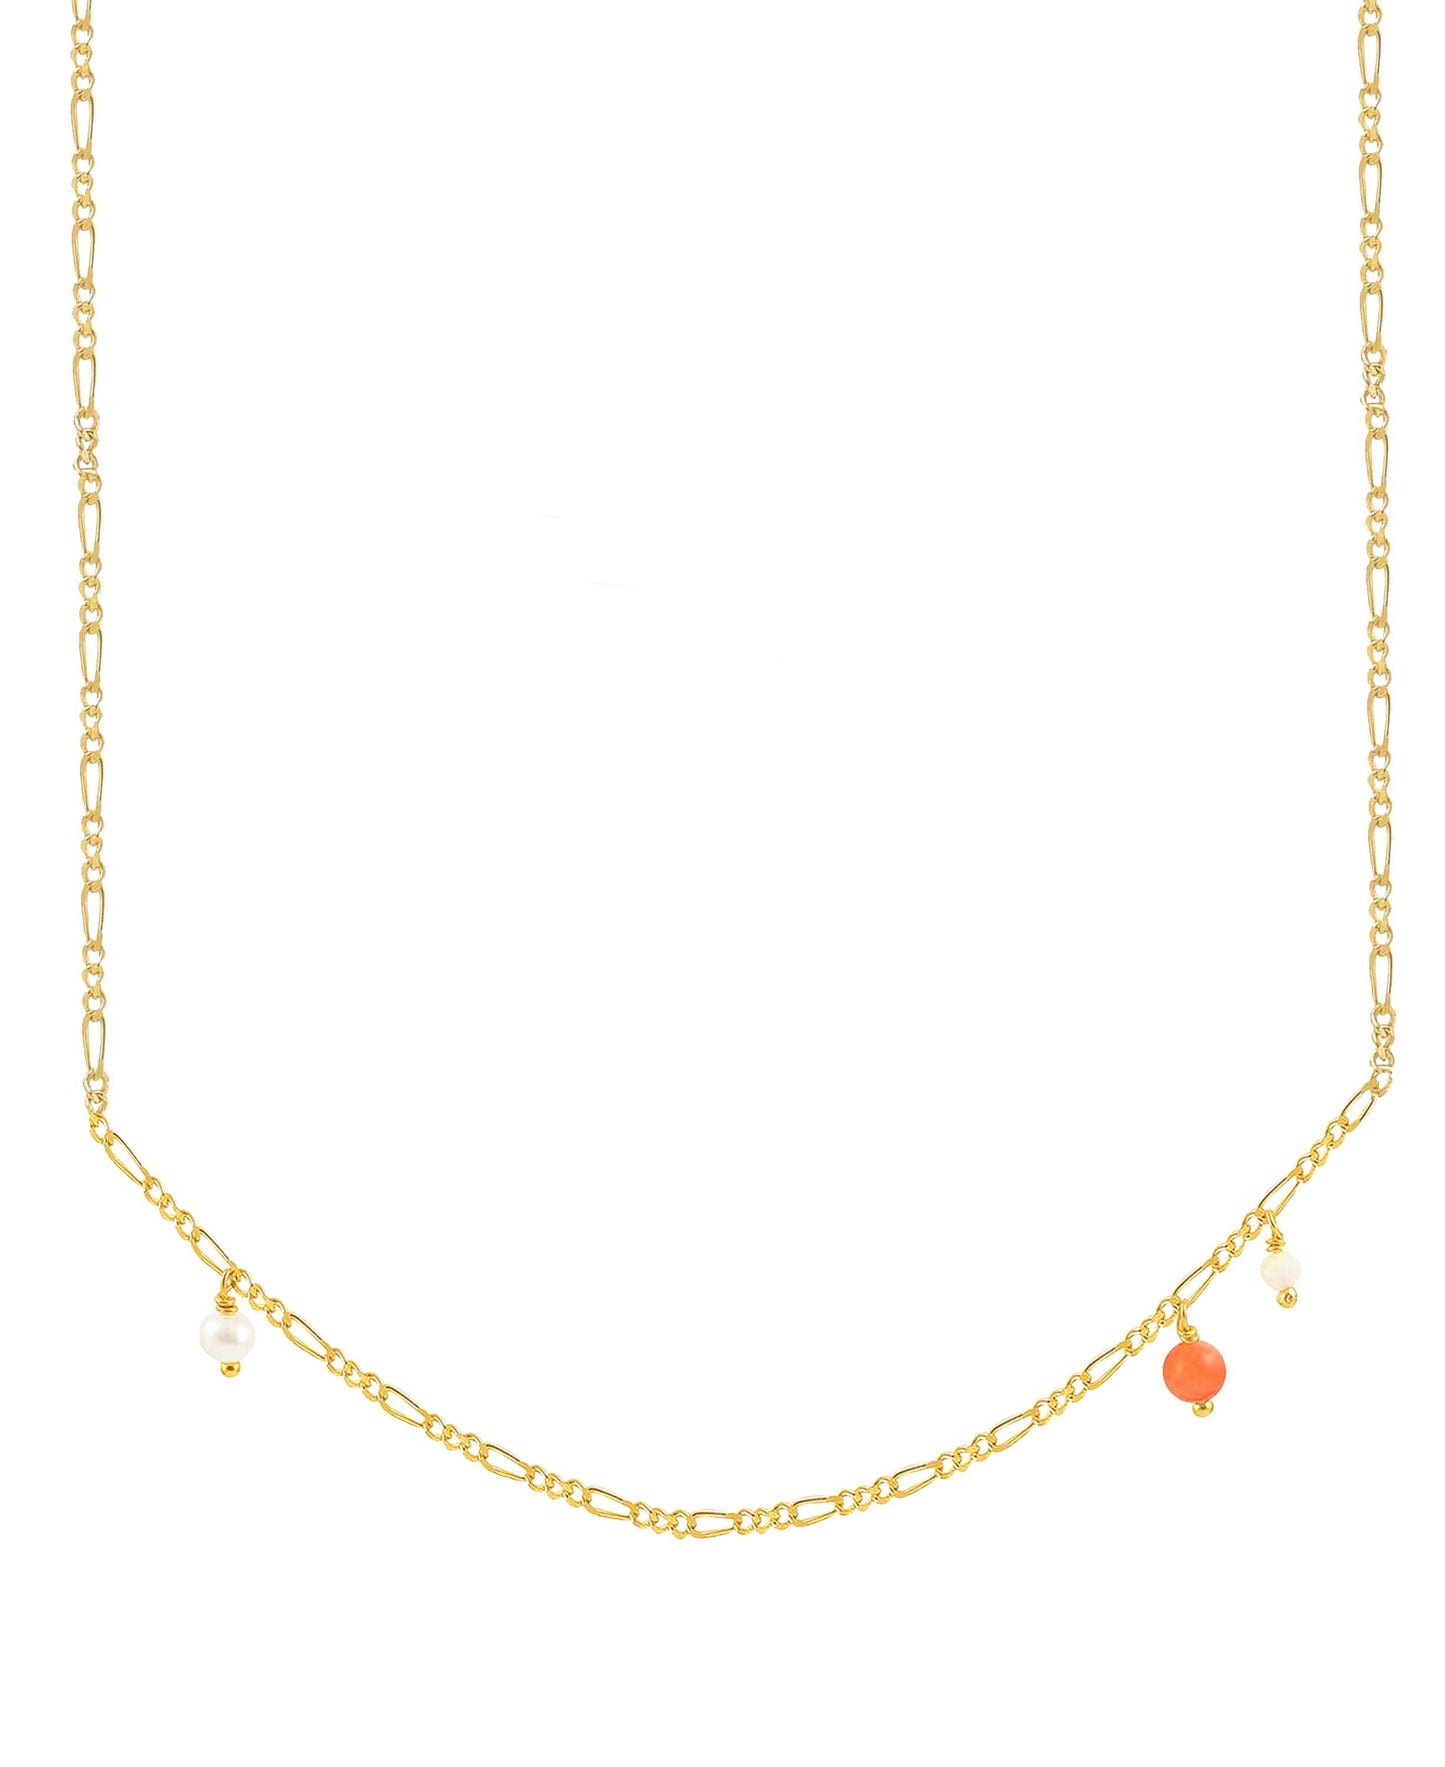 Coral cliff necklace